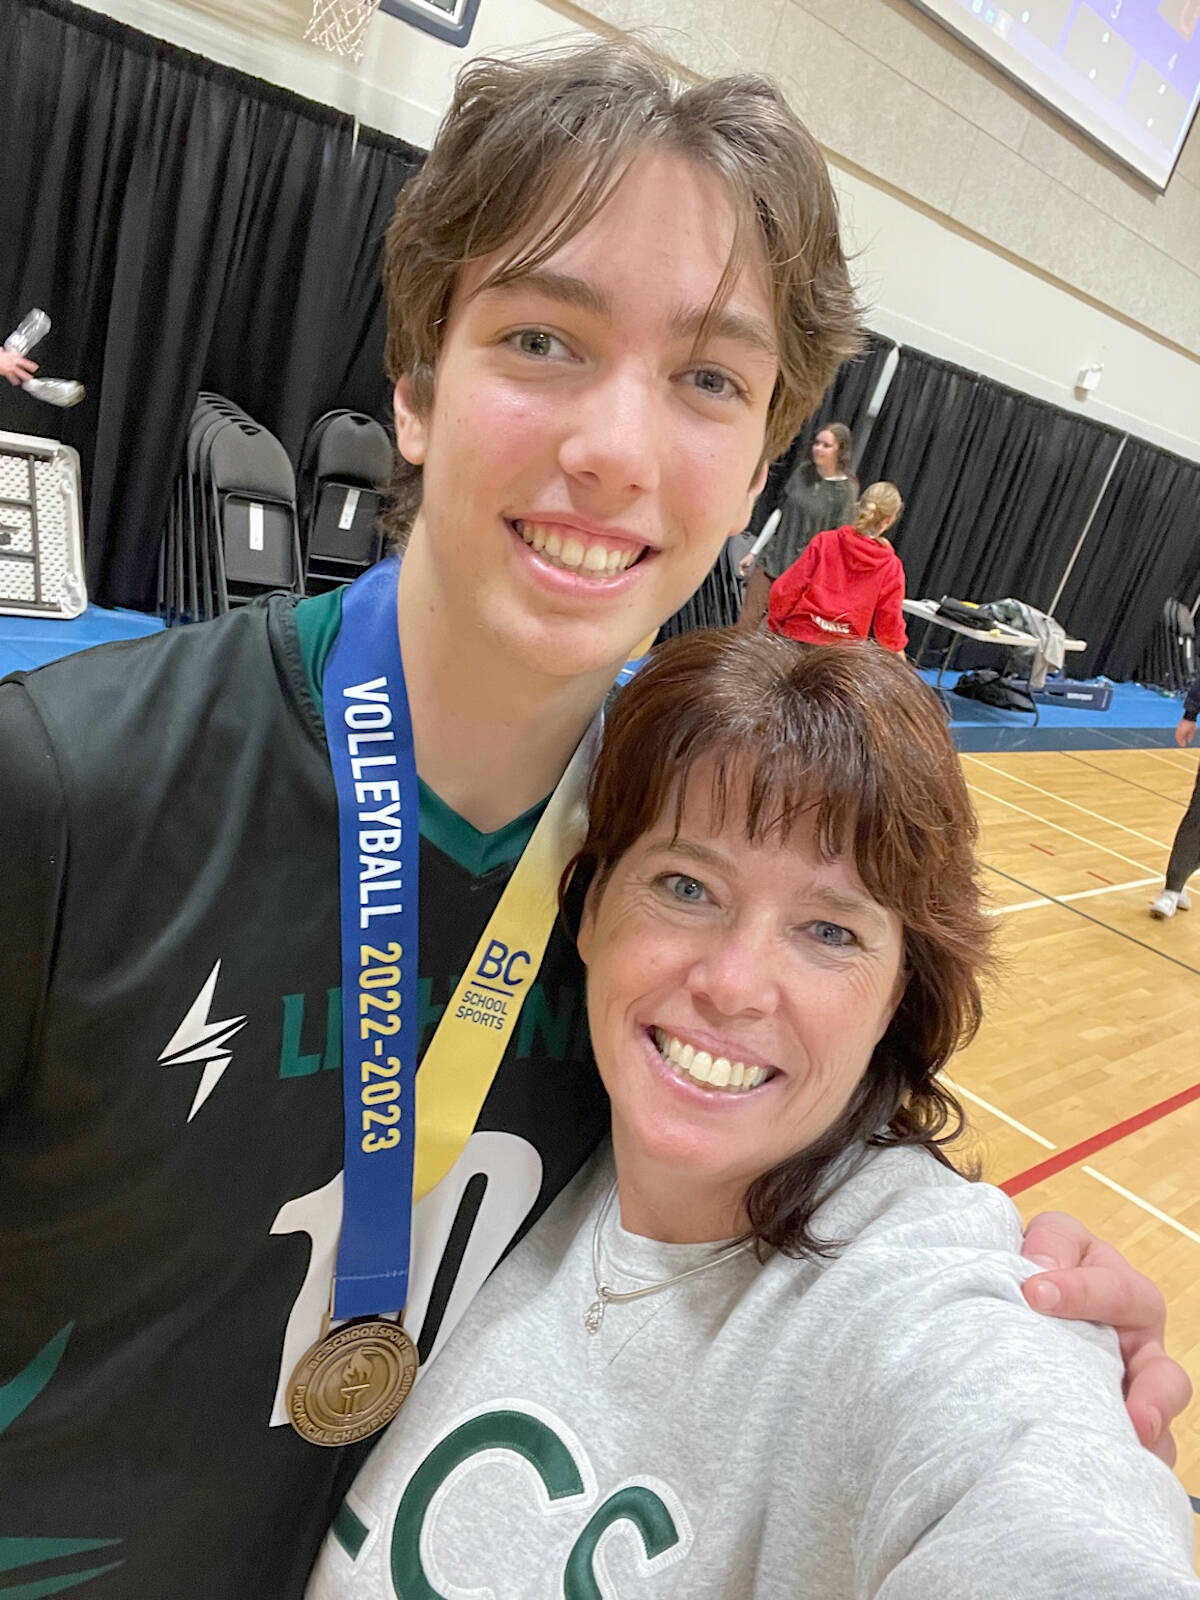 A proud Carole Hofer took a selfie with son Zach and his latest gold medal. Zach will be the third Hofer son to play for Trinity Western University, where Carol and husband Ryan have been coaching for more than two decades. (Special to Langley Advance Times)